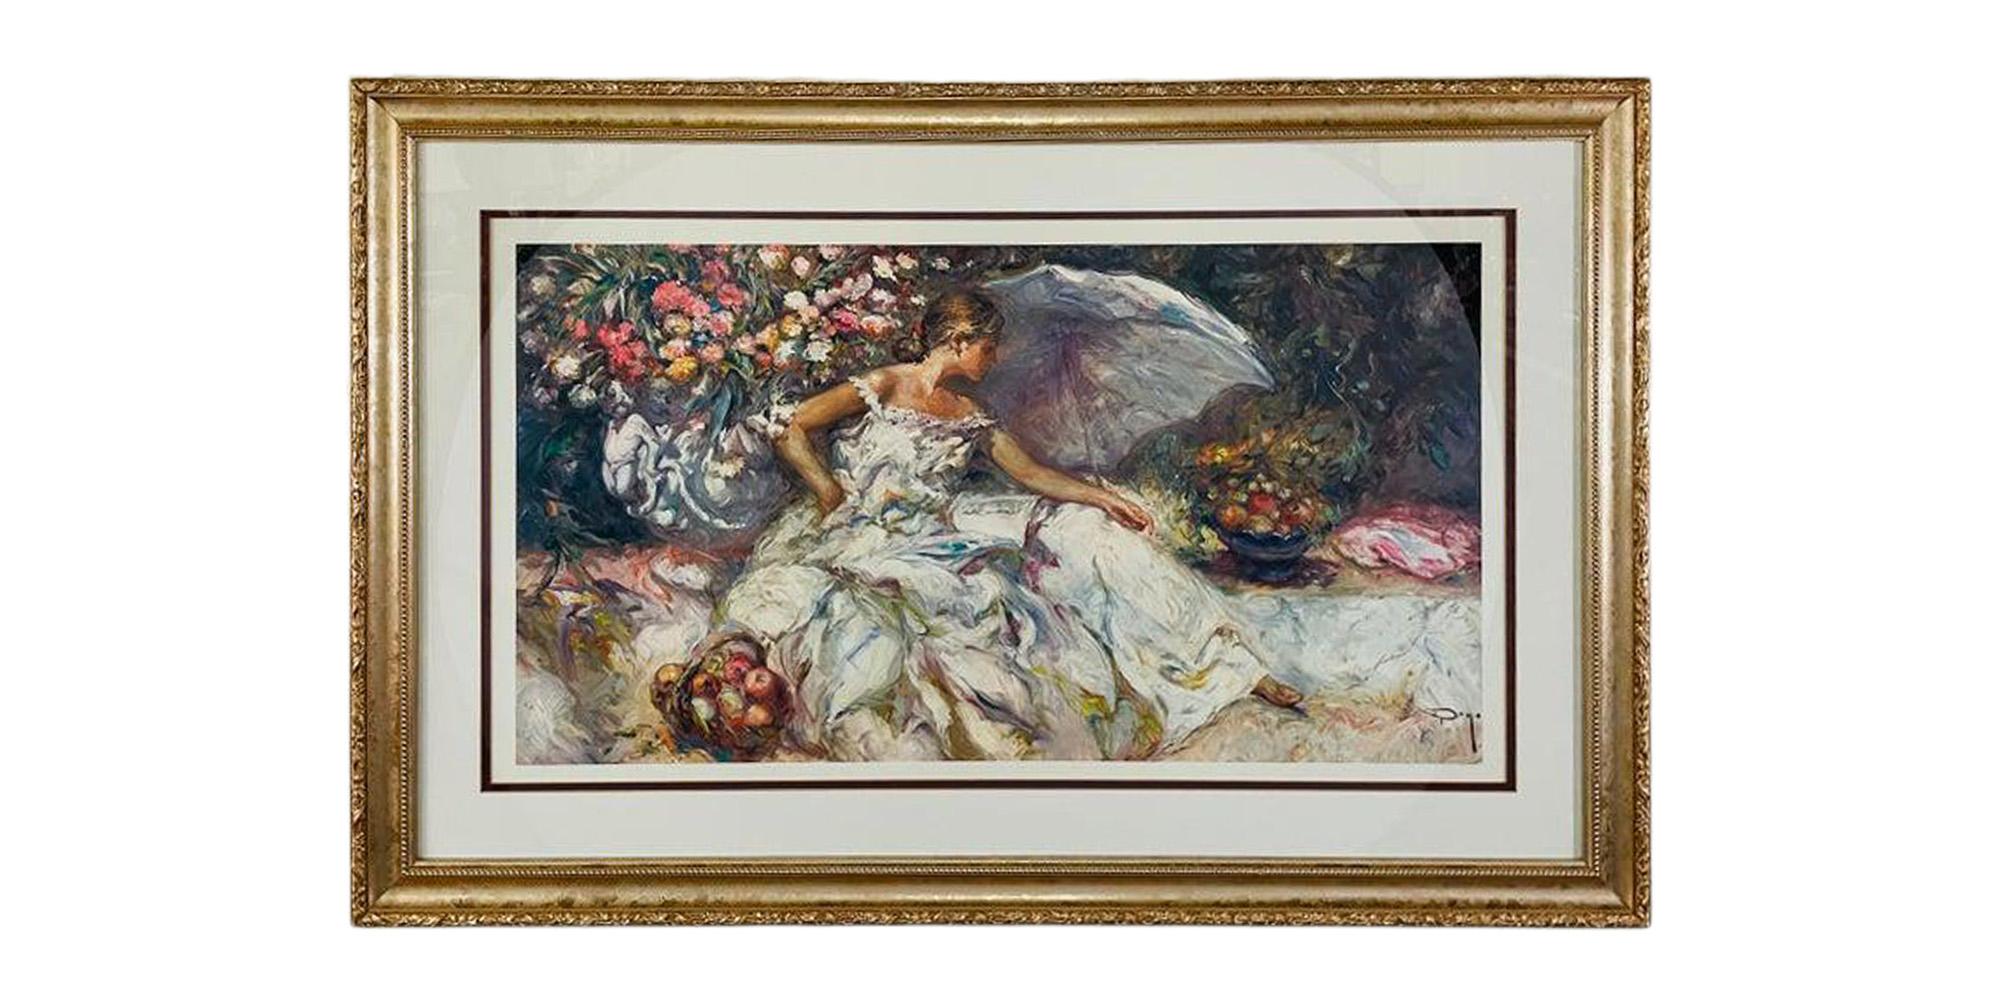 A beautiful print portraying a woman wearing a white dress and reading a book in a garden. The print is finely matted in while and custom farmed in a hand carved gilded wooden frame. The print is signed by artist Dayo. 

Dimensions: 43.75" W x 1.25"